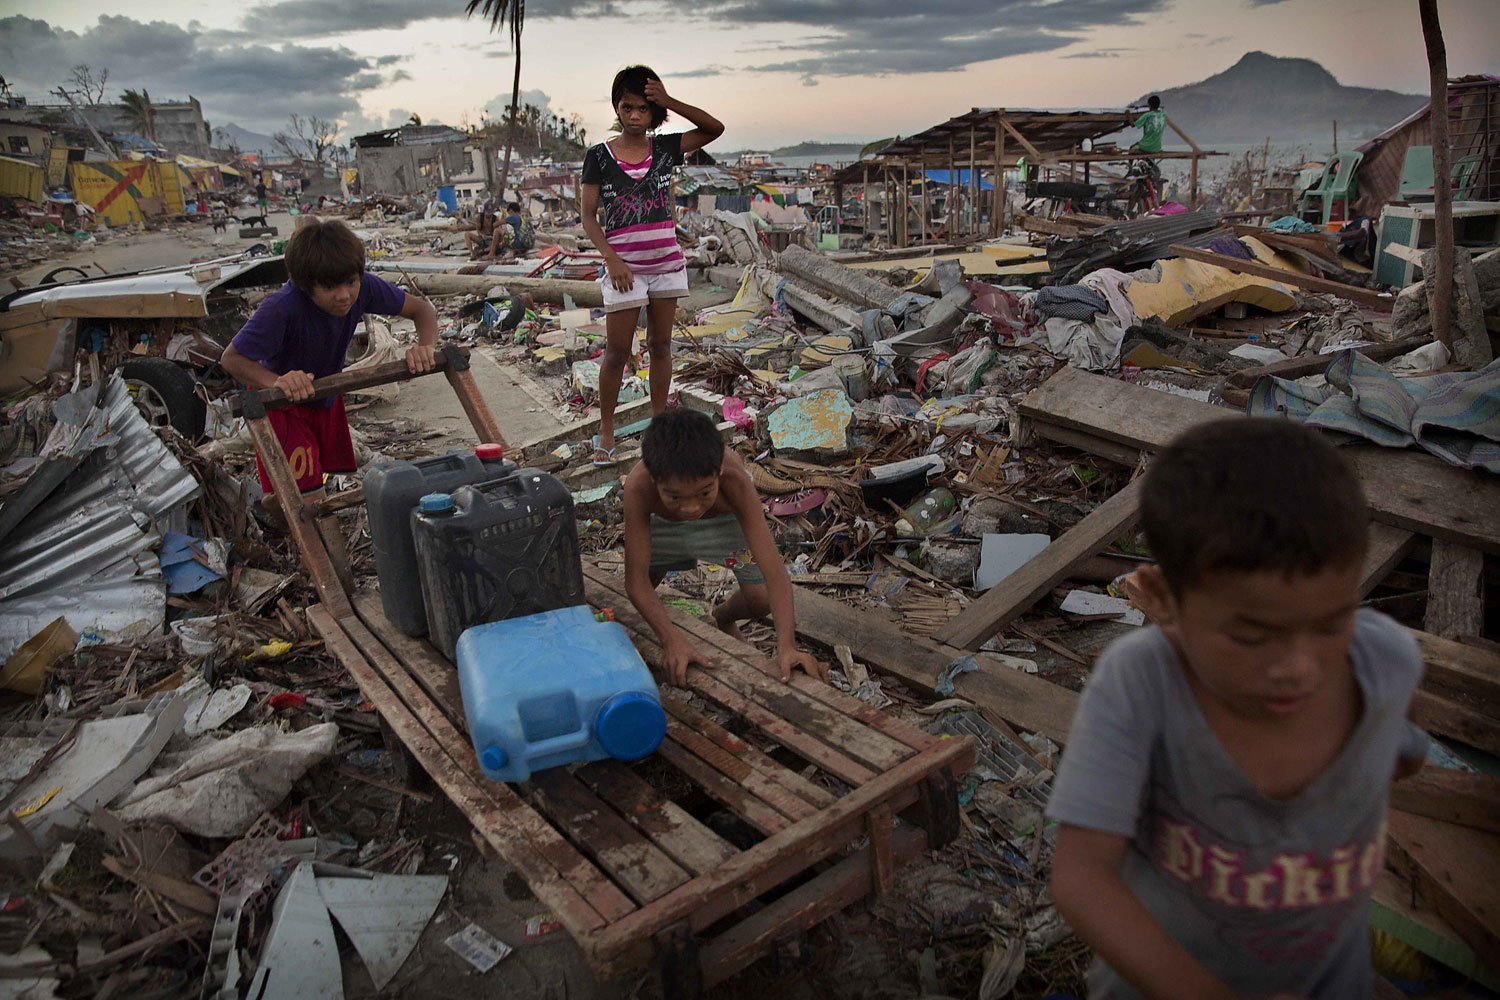 Young residents push a cart as they collect water in an area destroyed in the aftermath of Typhoon Haiyan on November 18, 2013 in Tacloban, Philippines.